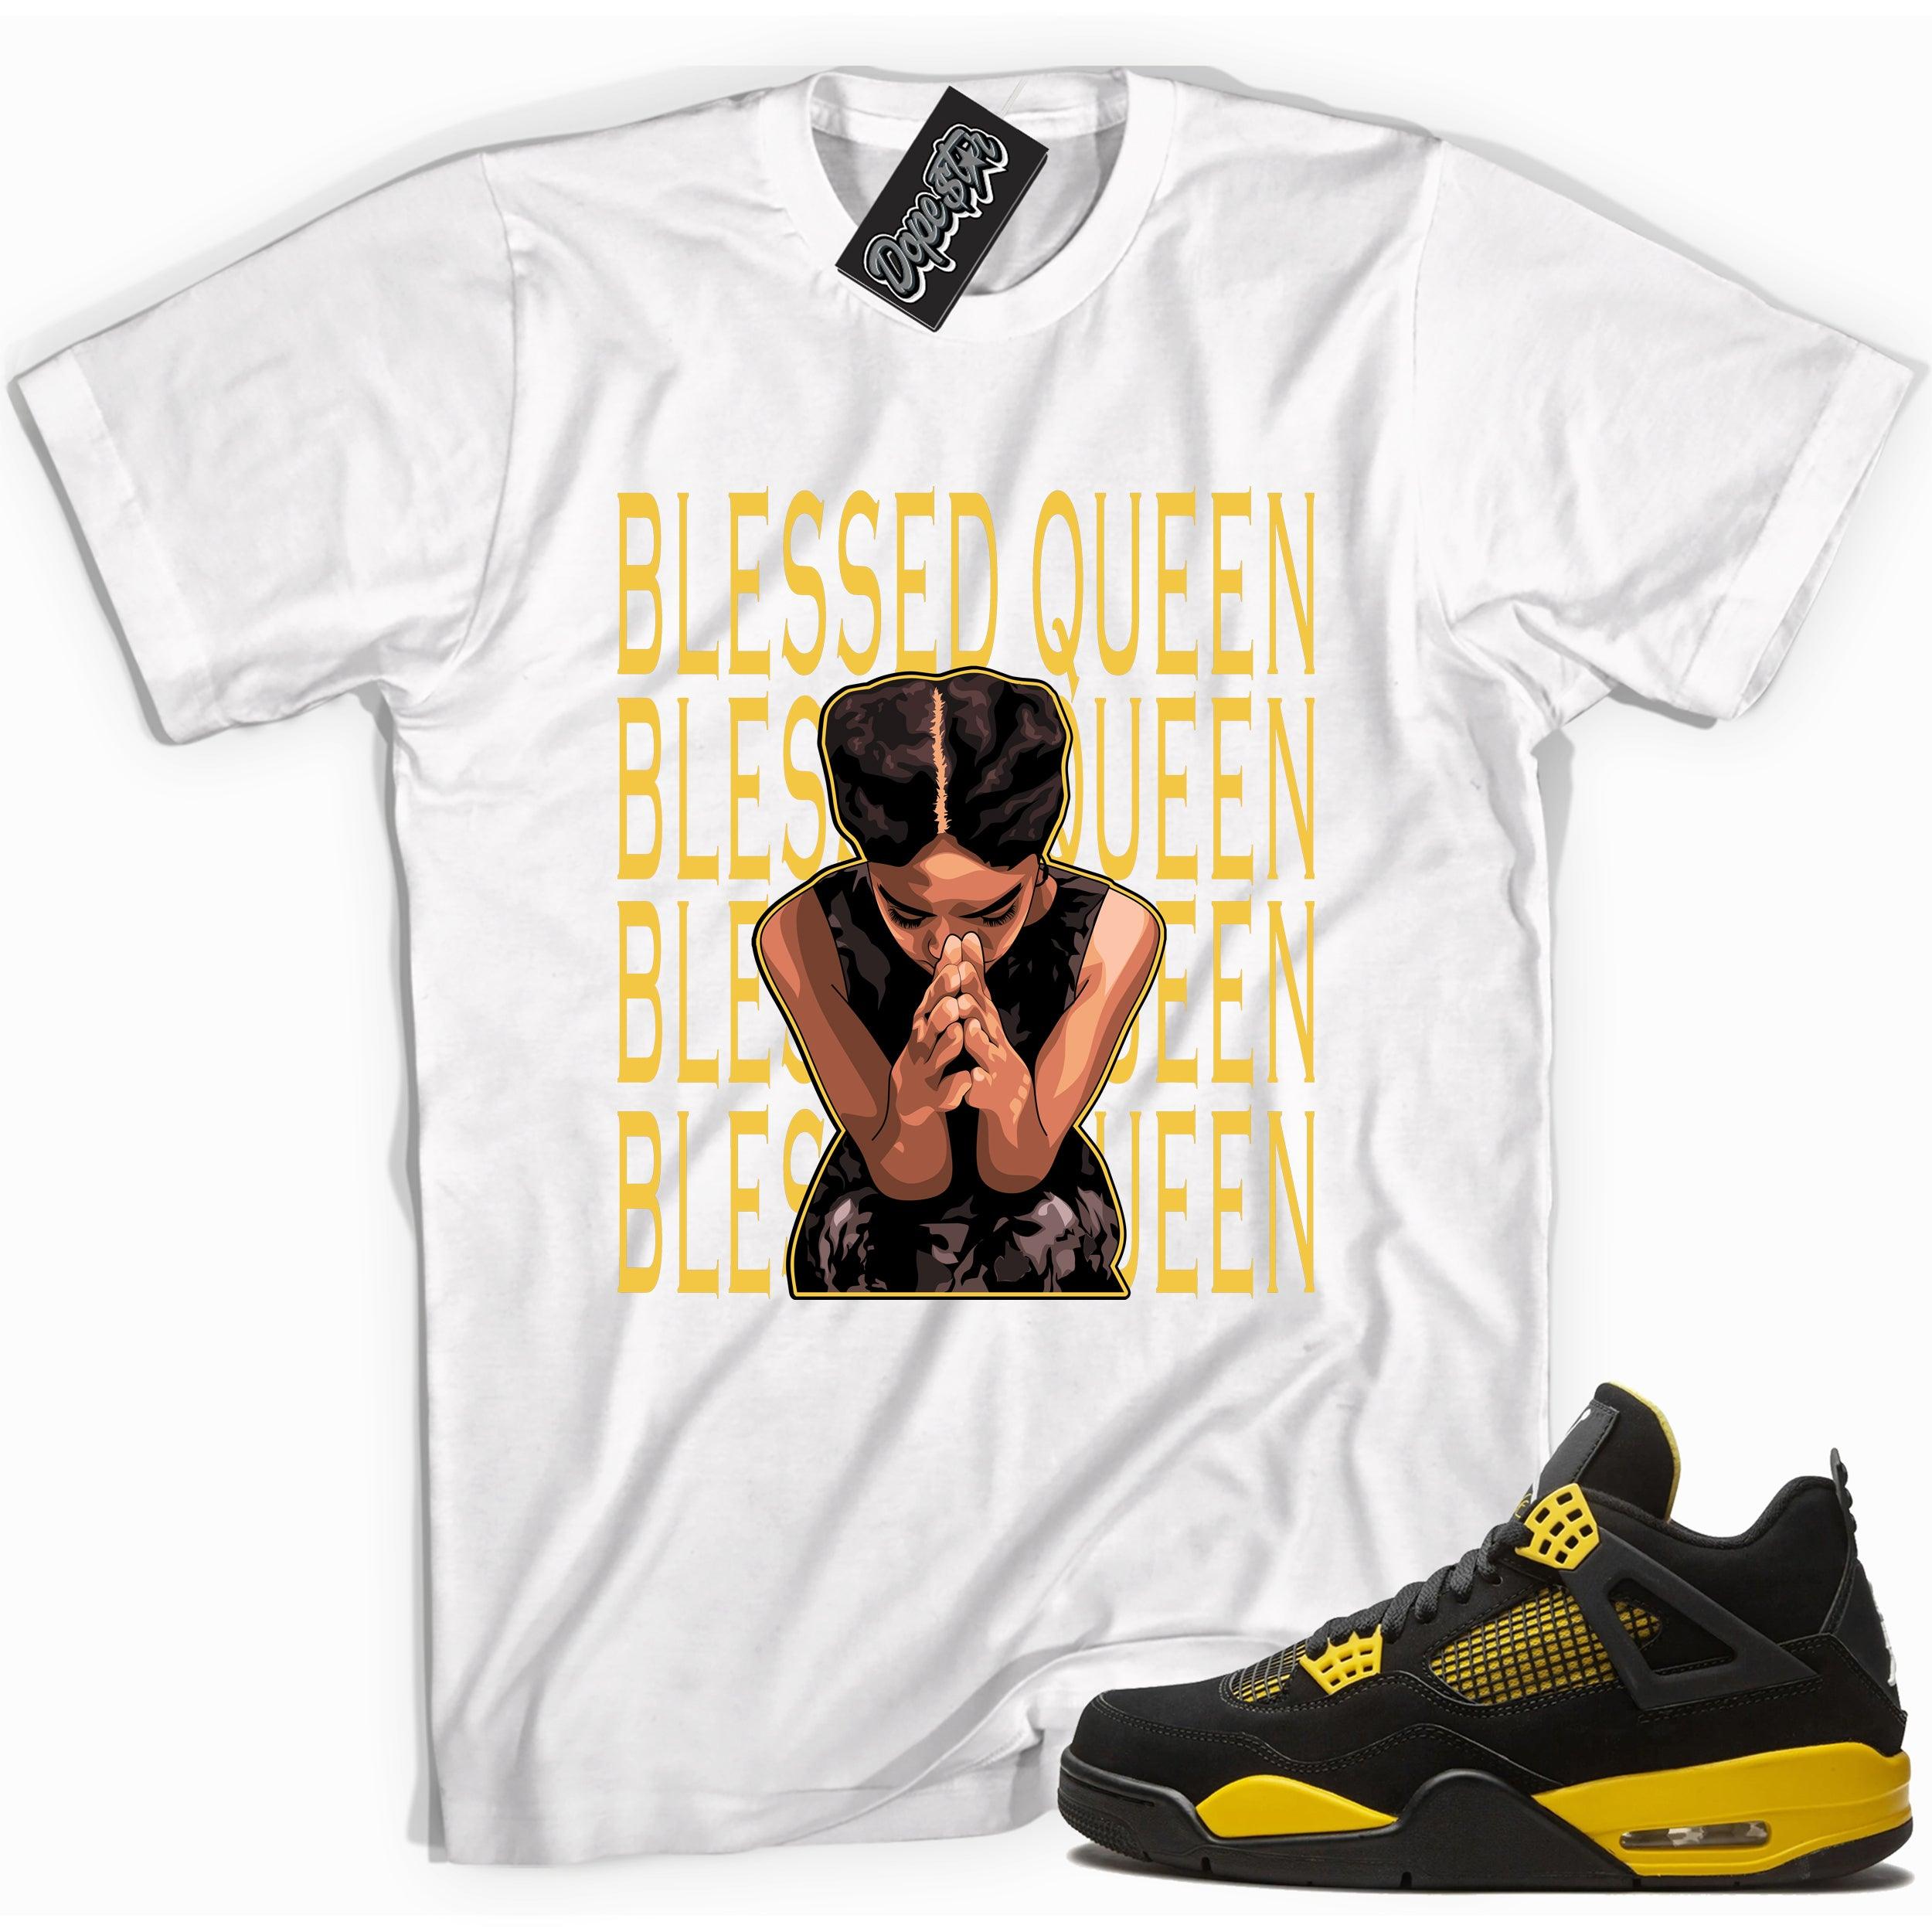 Cool white graphic tee with 'blessed queen' print, that perfectly matches Air Jordan 4 Thunder sneakers